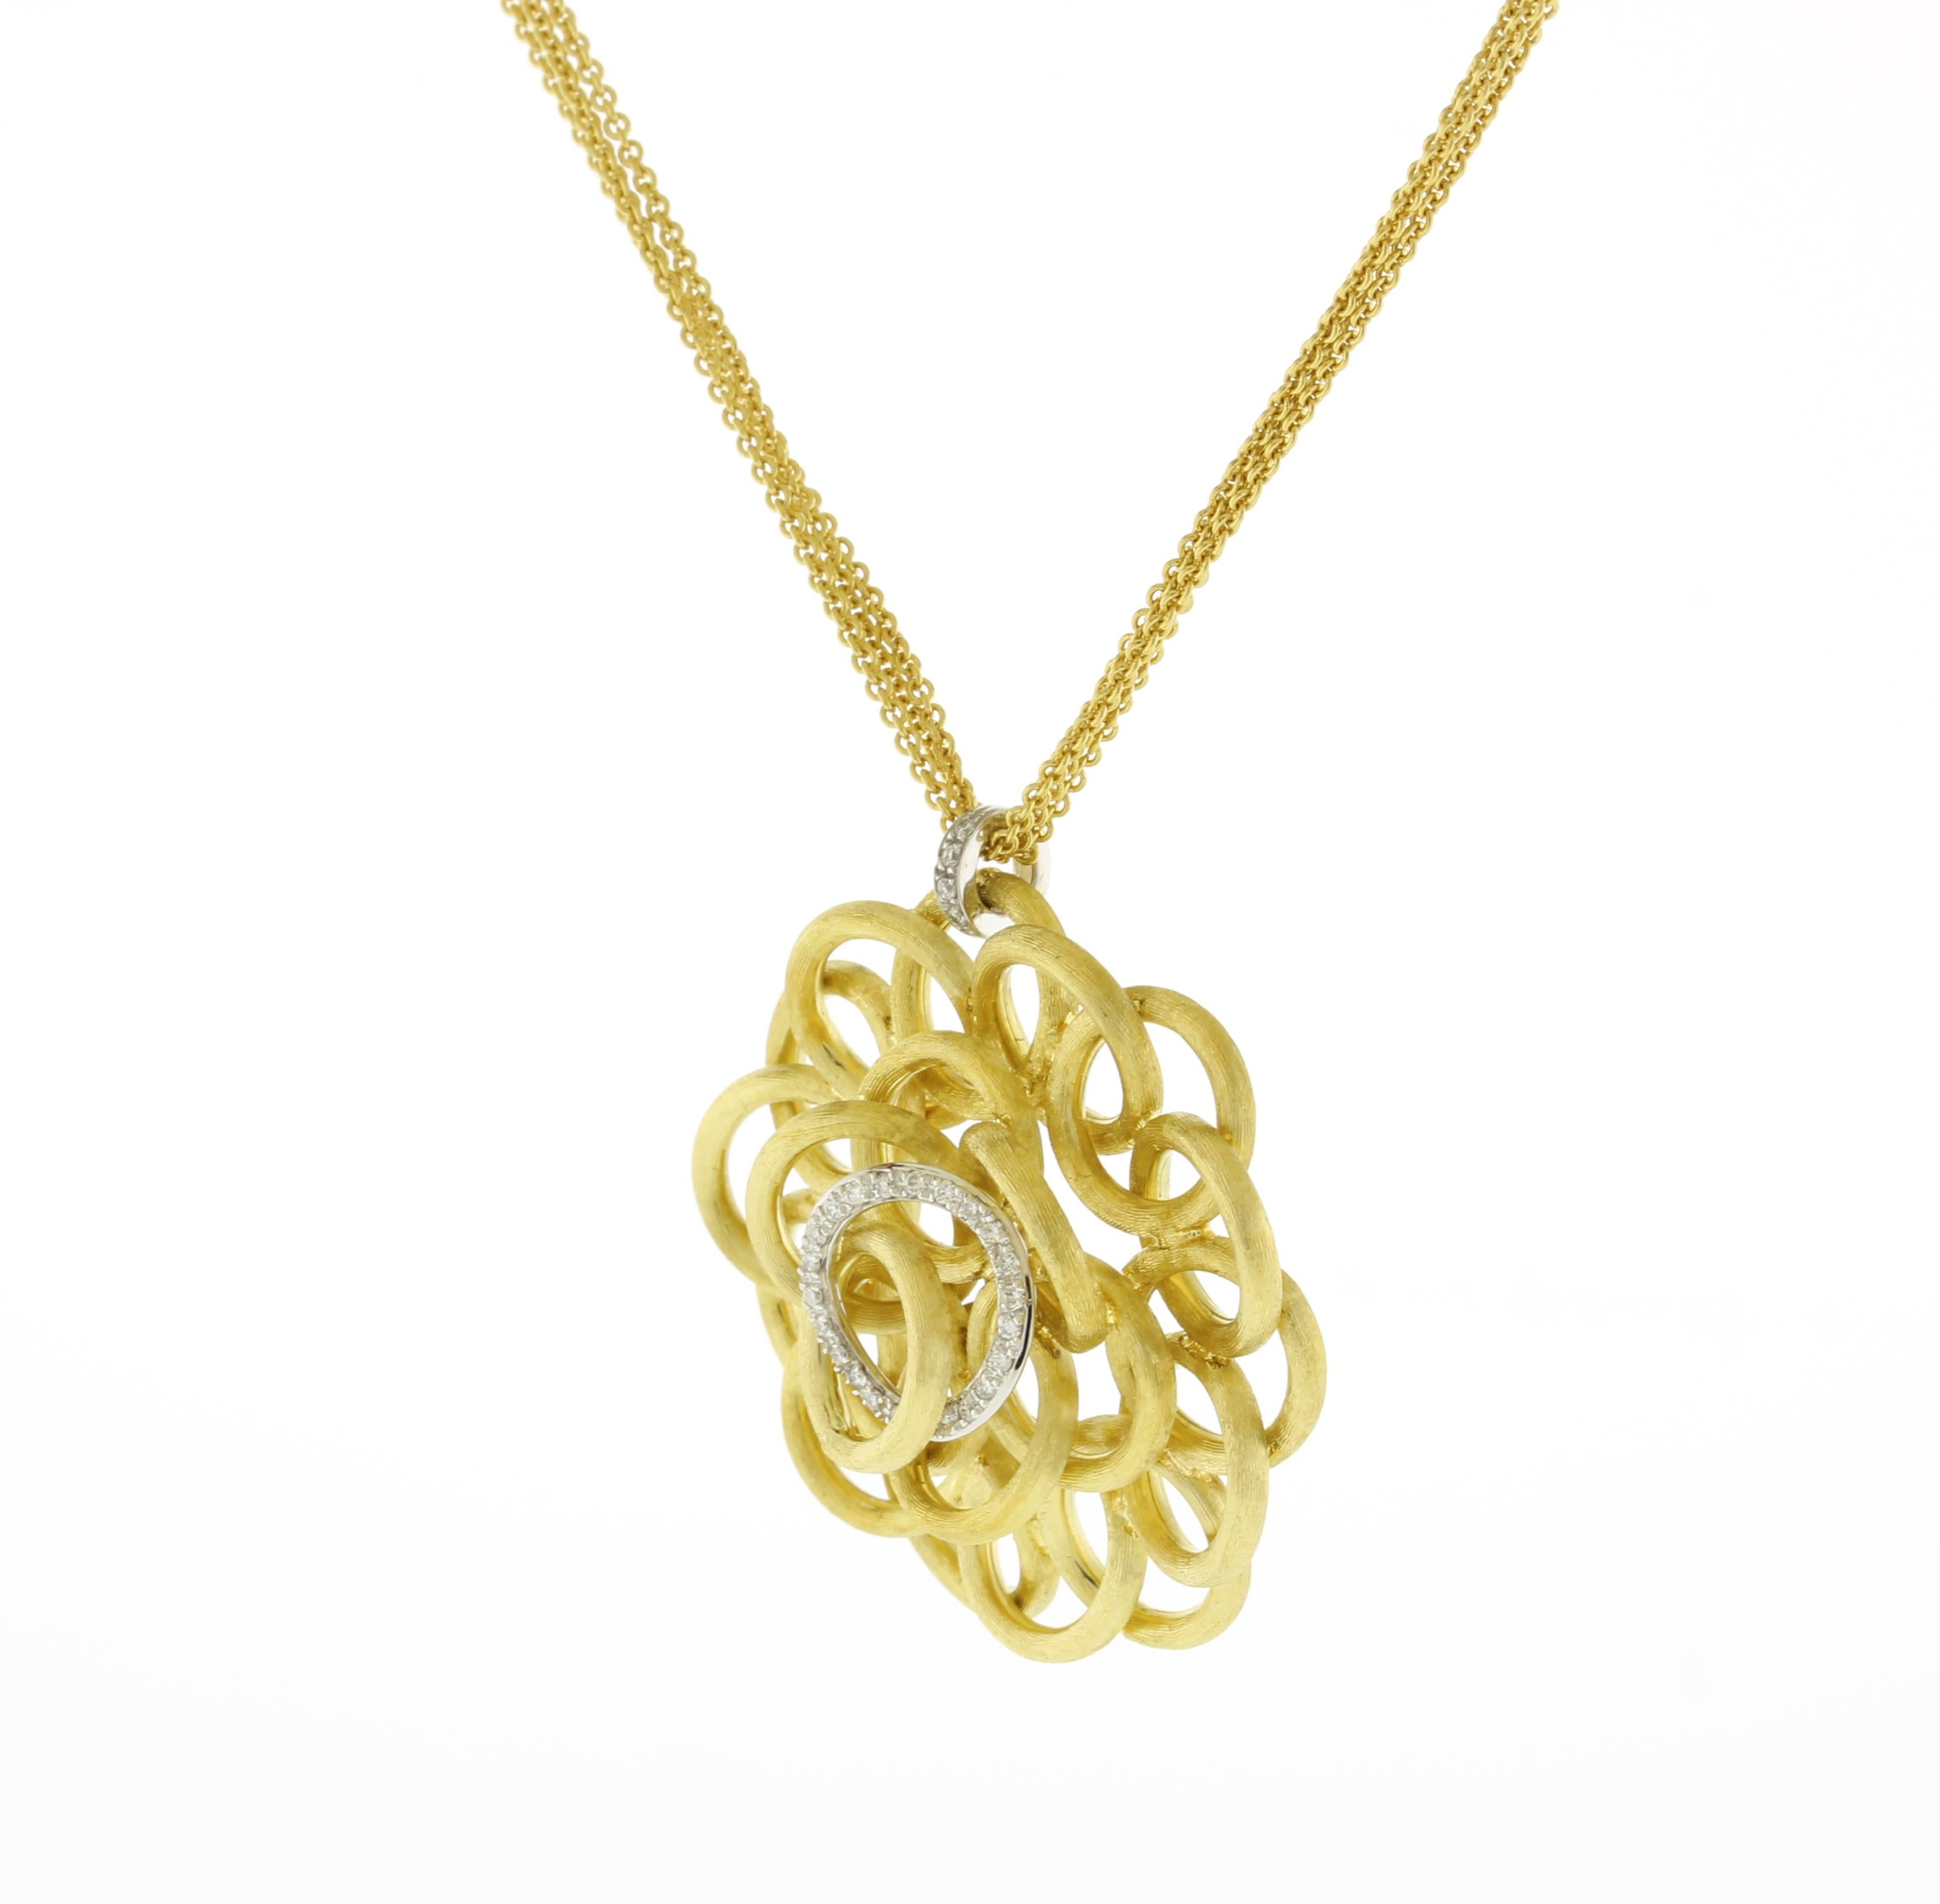 In every Marco Bicego collection, the gold is strictly 18 karat, perfectly sculpted by hand, rendering even more beautiful irregular, organic, natural and contemporary shapes. This necklace is from the Jaipur Gold Collection.
♦ Designer: Marco